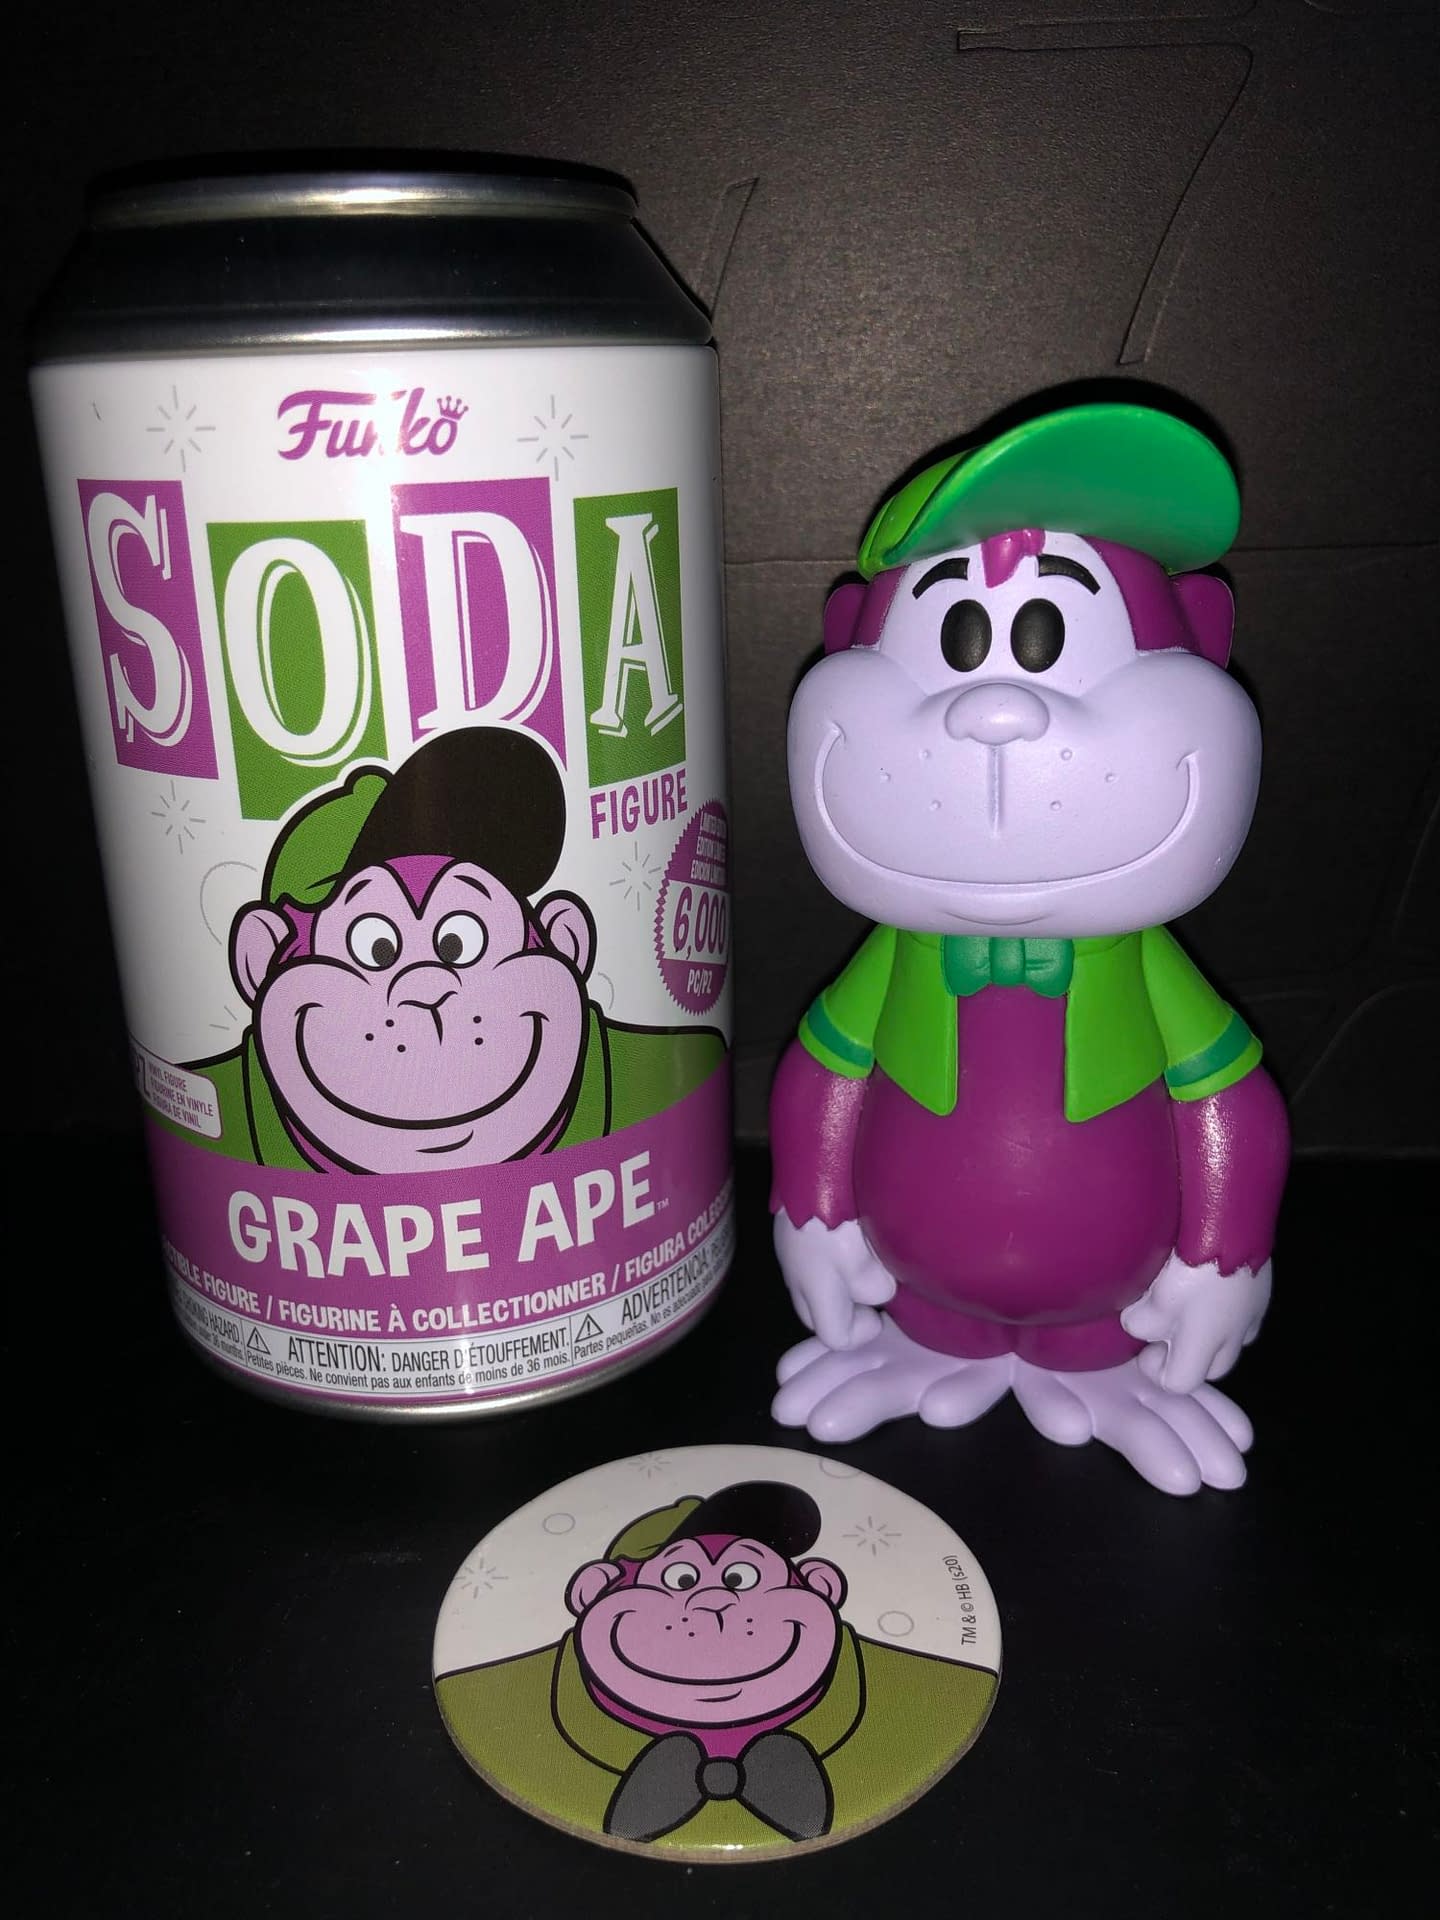 Funko Soda Vinyl Figure The Grape Ape Show Great Ape figure and can front view.